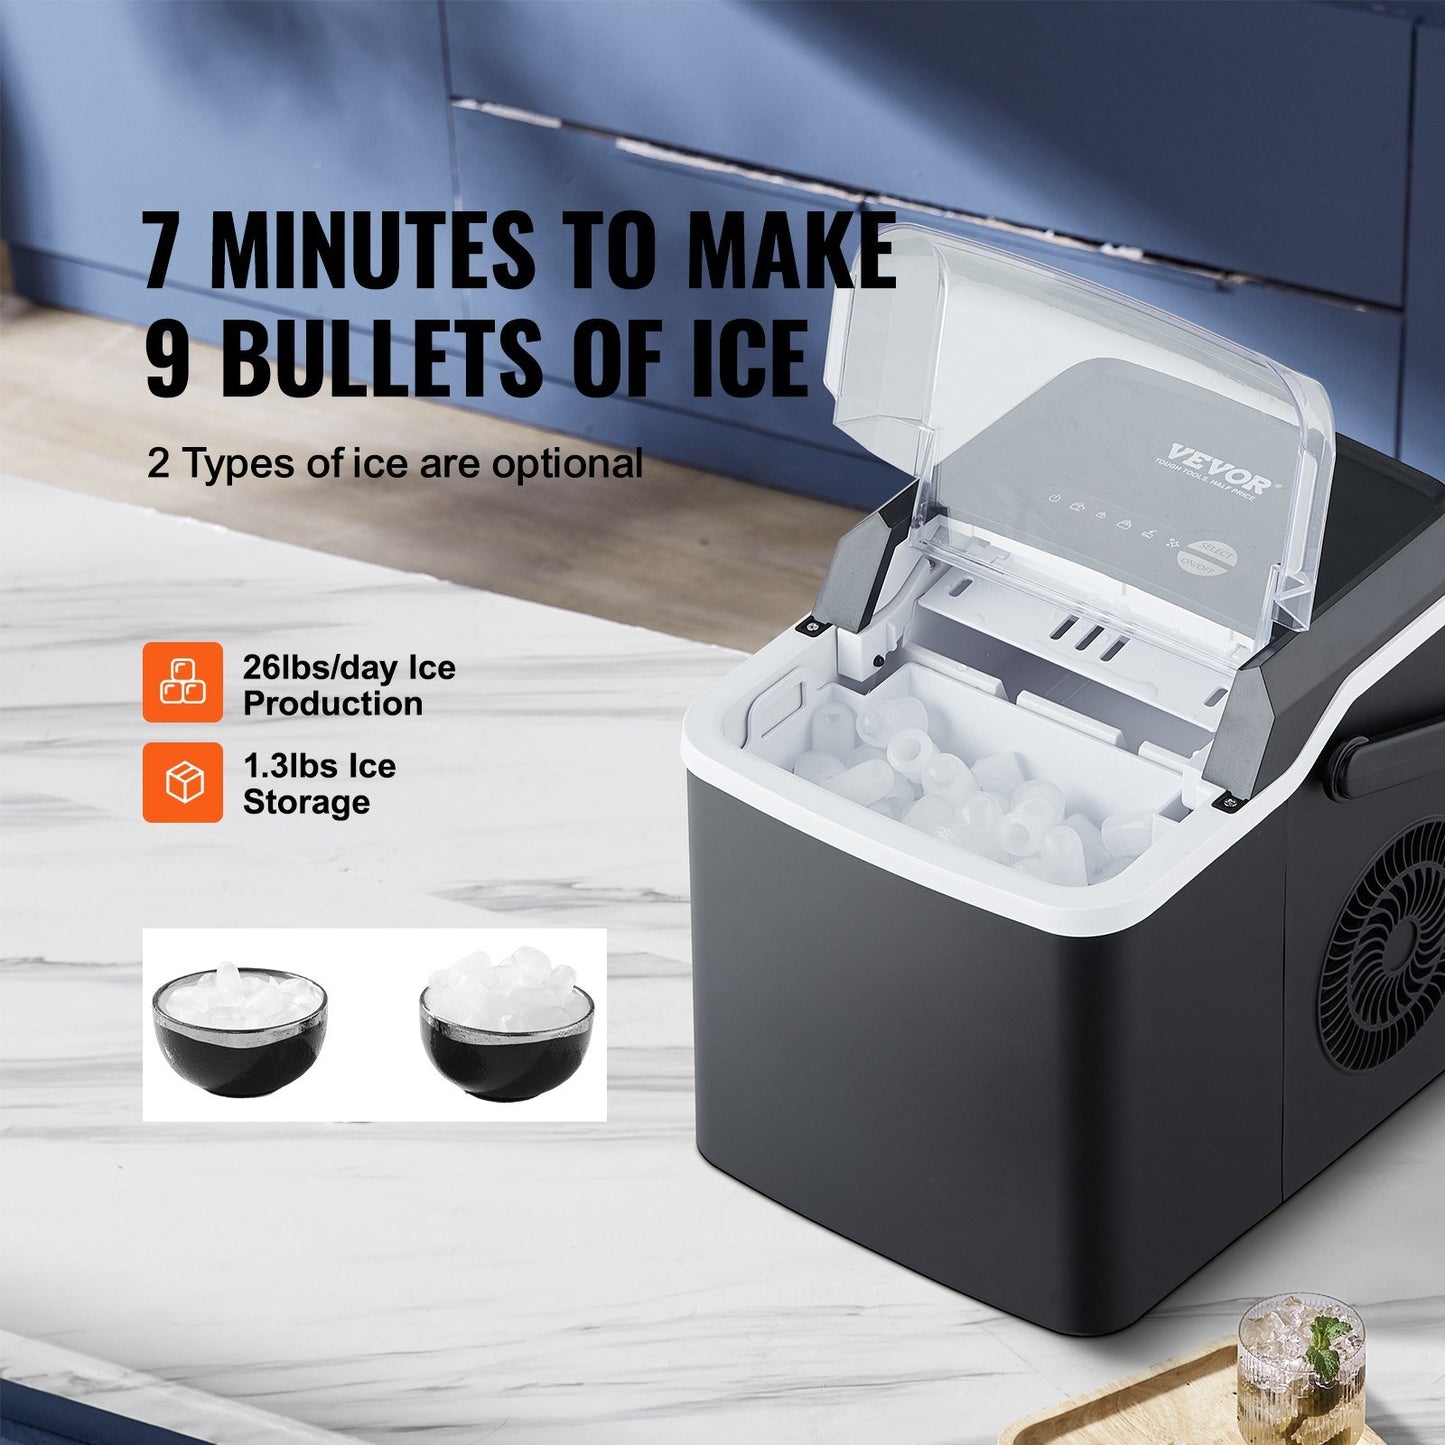 "VEVOR Countertop Ice Maker, 26lbs/24Hrs, Self-Cleaning with Ice Scoop and Basket"